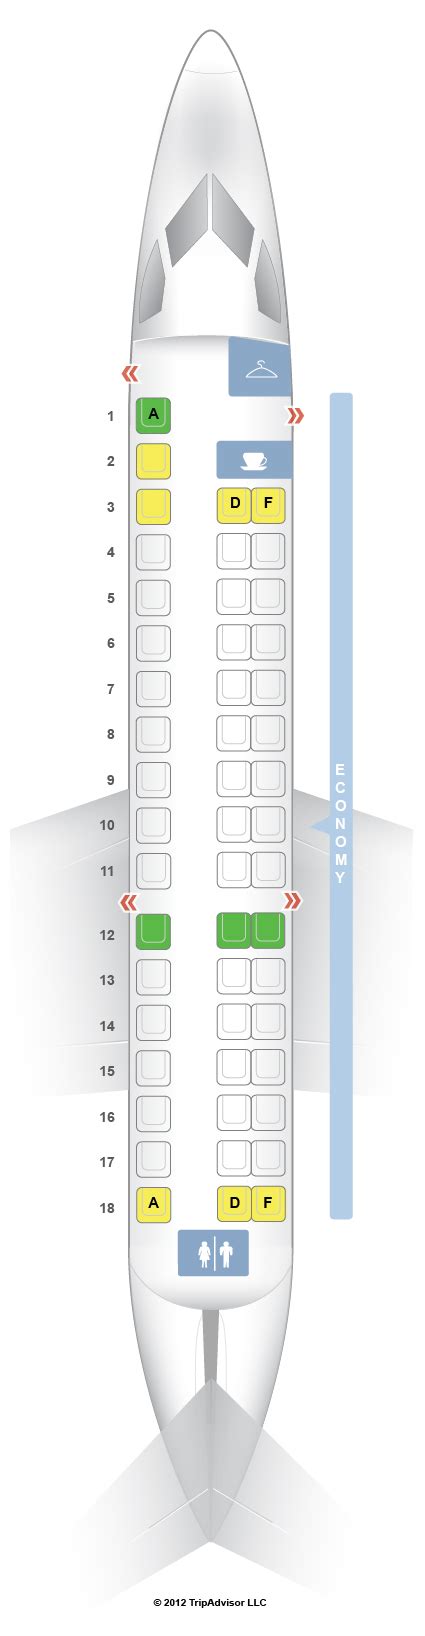 Erj 145 seat map. Pitch 31". Width 17". Recline 3". Passengers flying with Africa World Airlines on their Embraer ERJ 145 can expect a straightforward experience in economy class. Designed for 50 travelers, the cabin balances affordability with essential comforts. While the seating is functional, passengers can enjoy a selection of in-flight entertainment. 